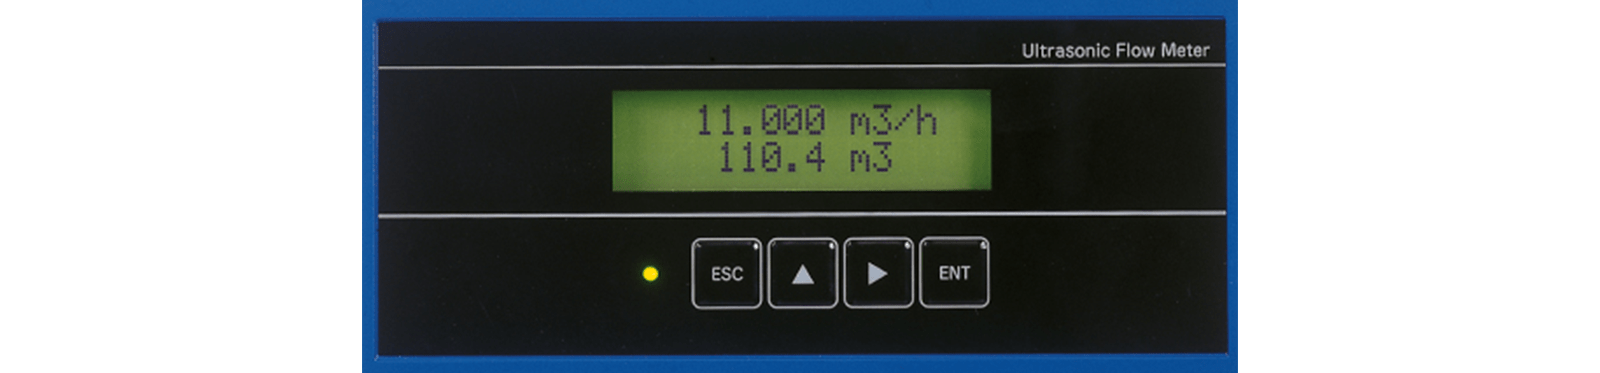 how accurate is an ultrasonic flowmeter?